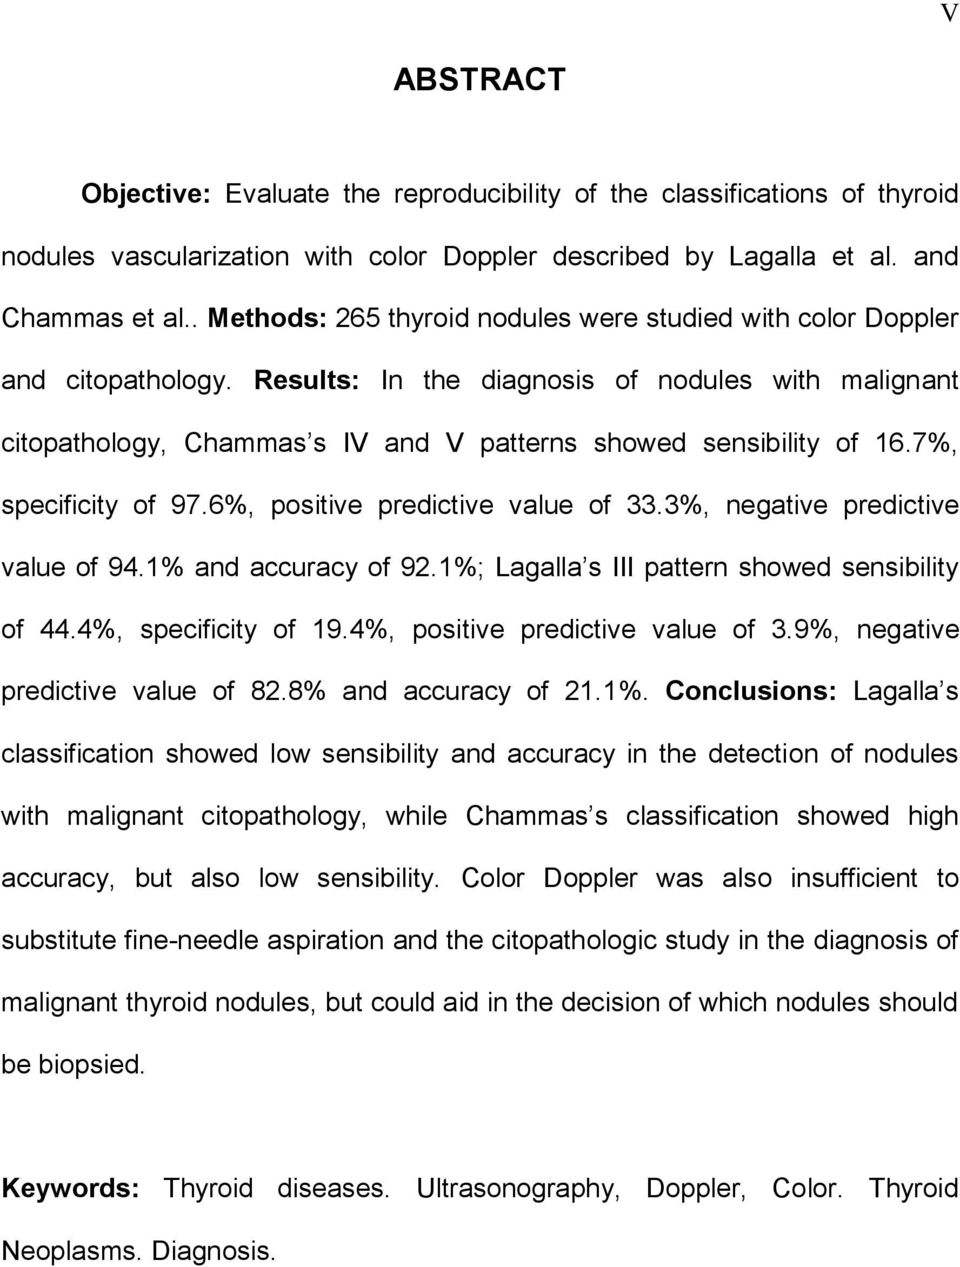 Results: In the diagnosis of nodules with malignant citopathology, Chammas s IV and V patterns showed sensibility of 16.7%, specificity of 97.6%, positive predictive value of 33.